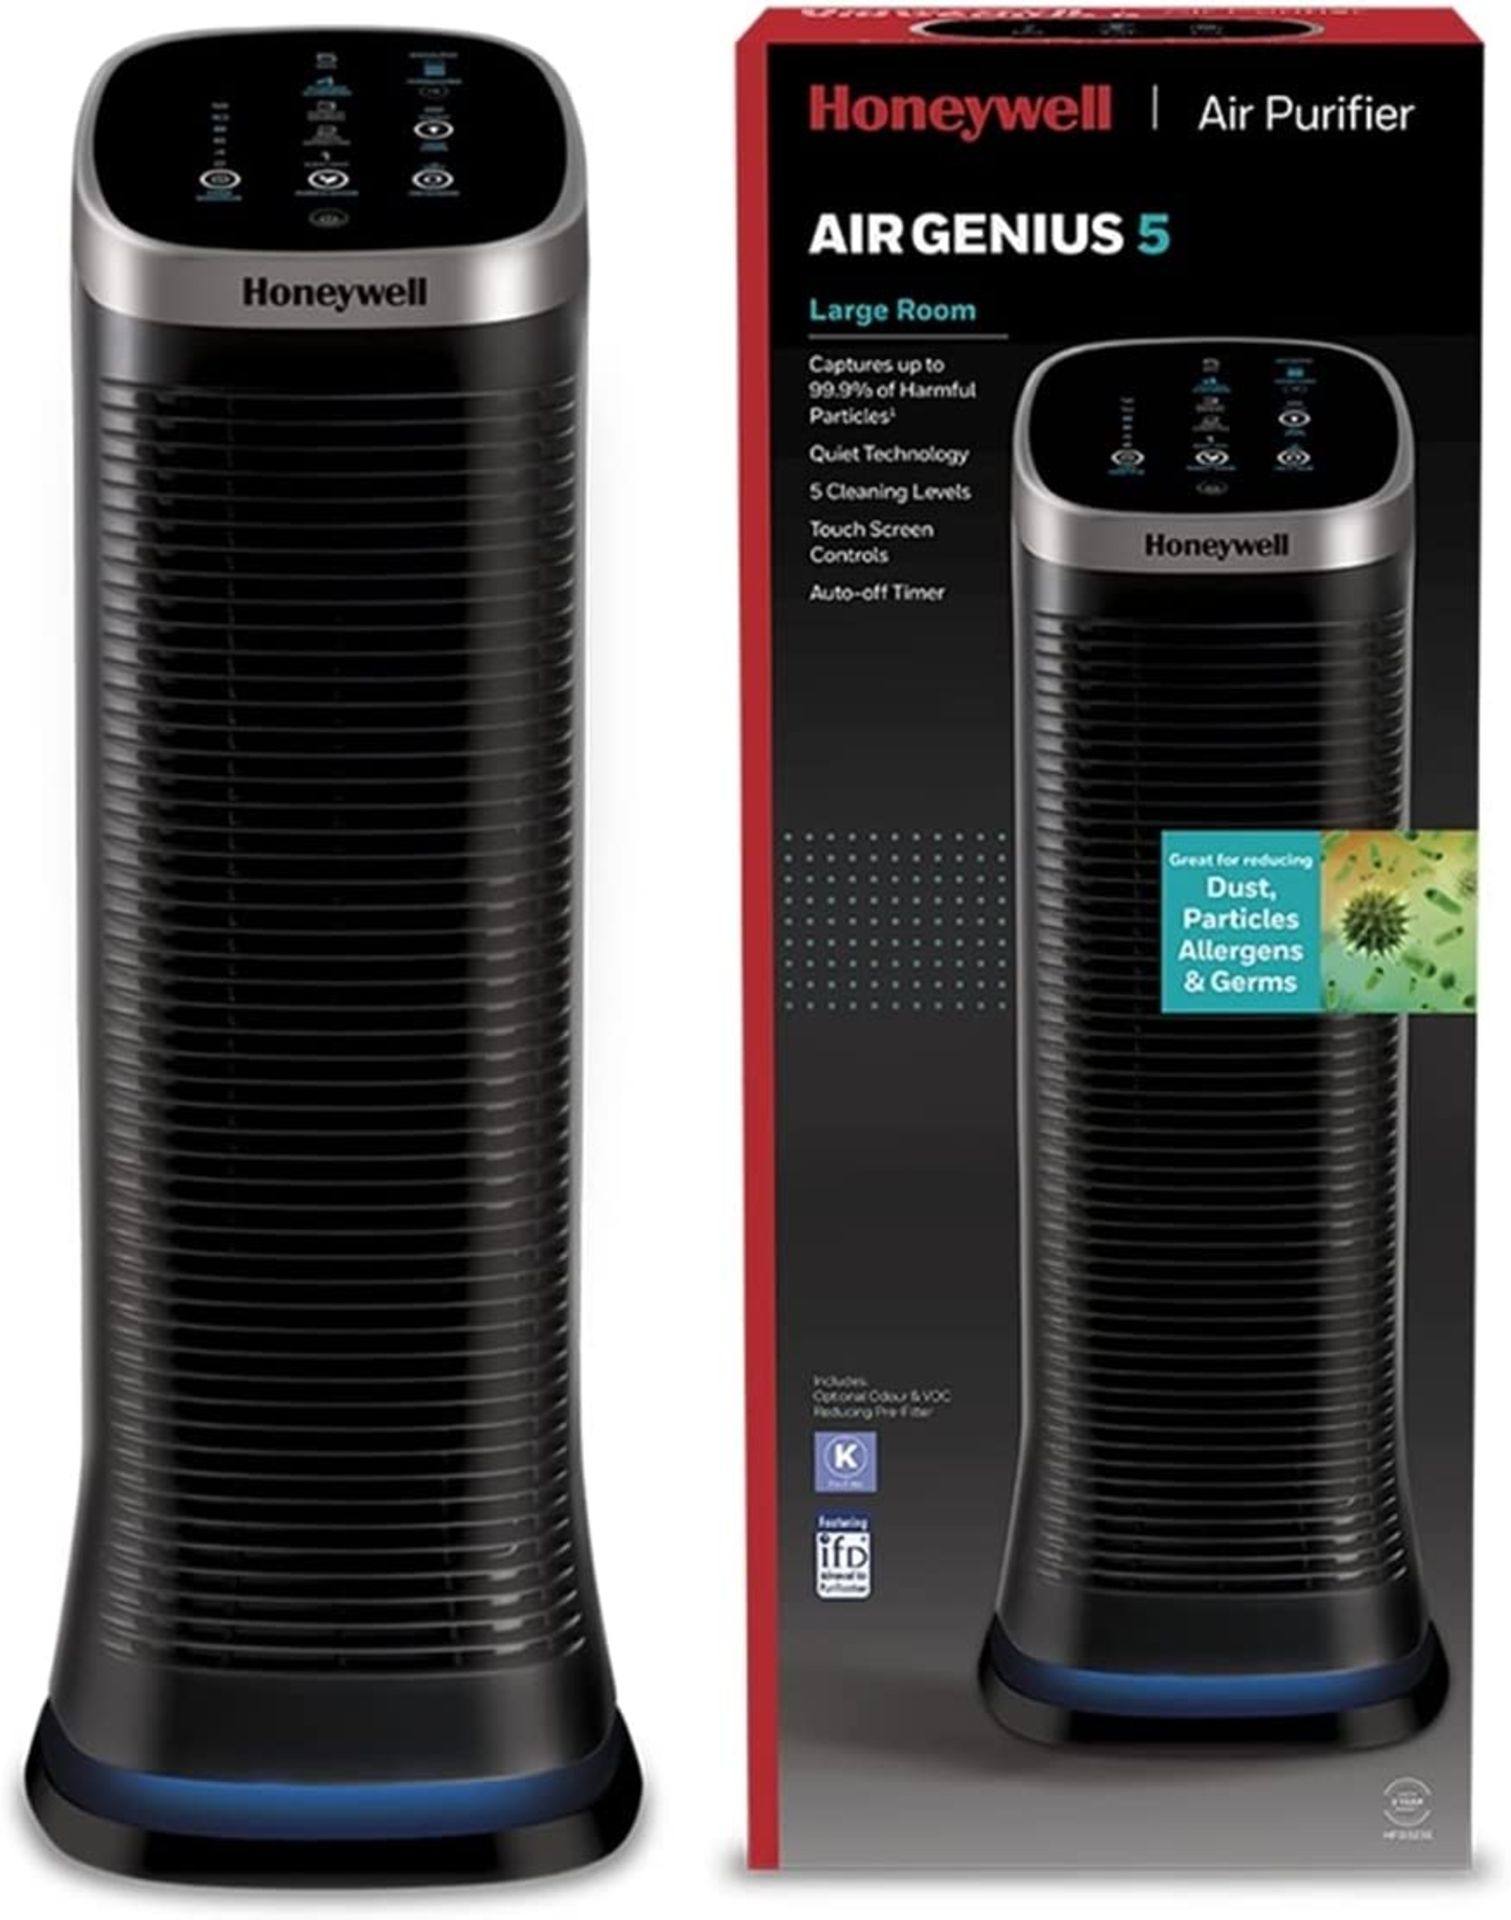 Honeywell Air Genius 5 Air Purifier with Permanent & Washable ifD Filter - 5 Cleaning Levels -